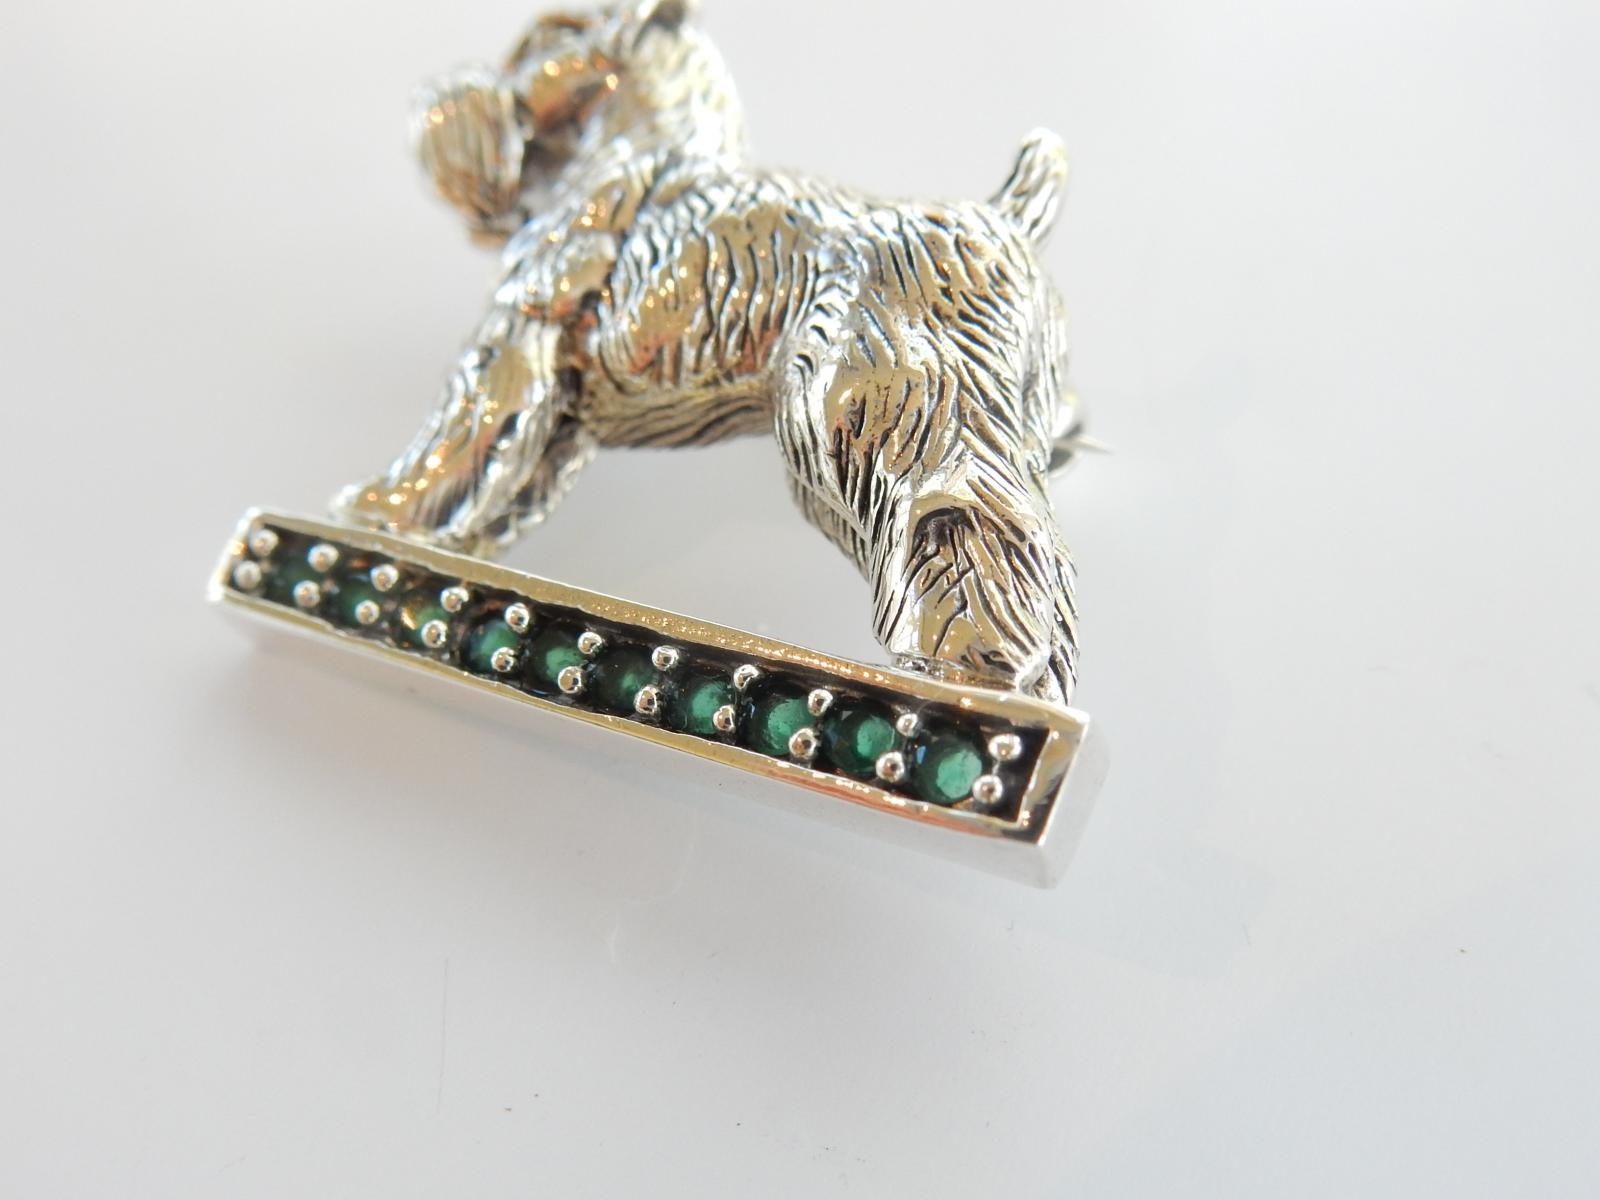 Victorian Style Large Scotty Dog Pin Brooch with Emerald and Sapphire Stone 925 Sterling Silver